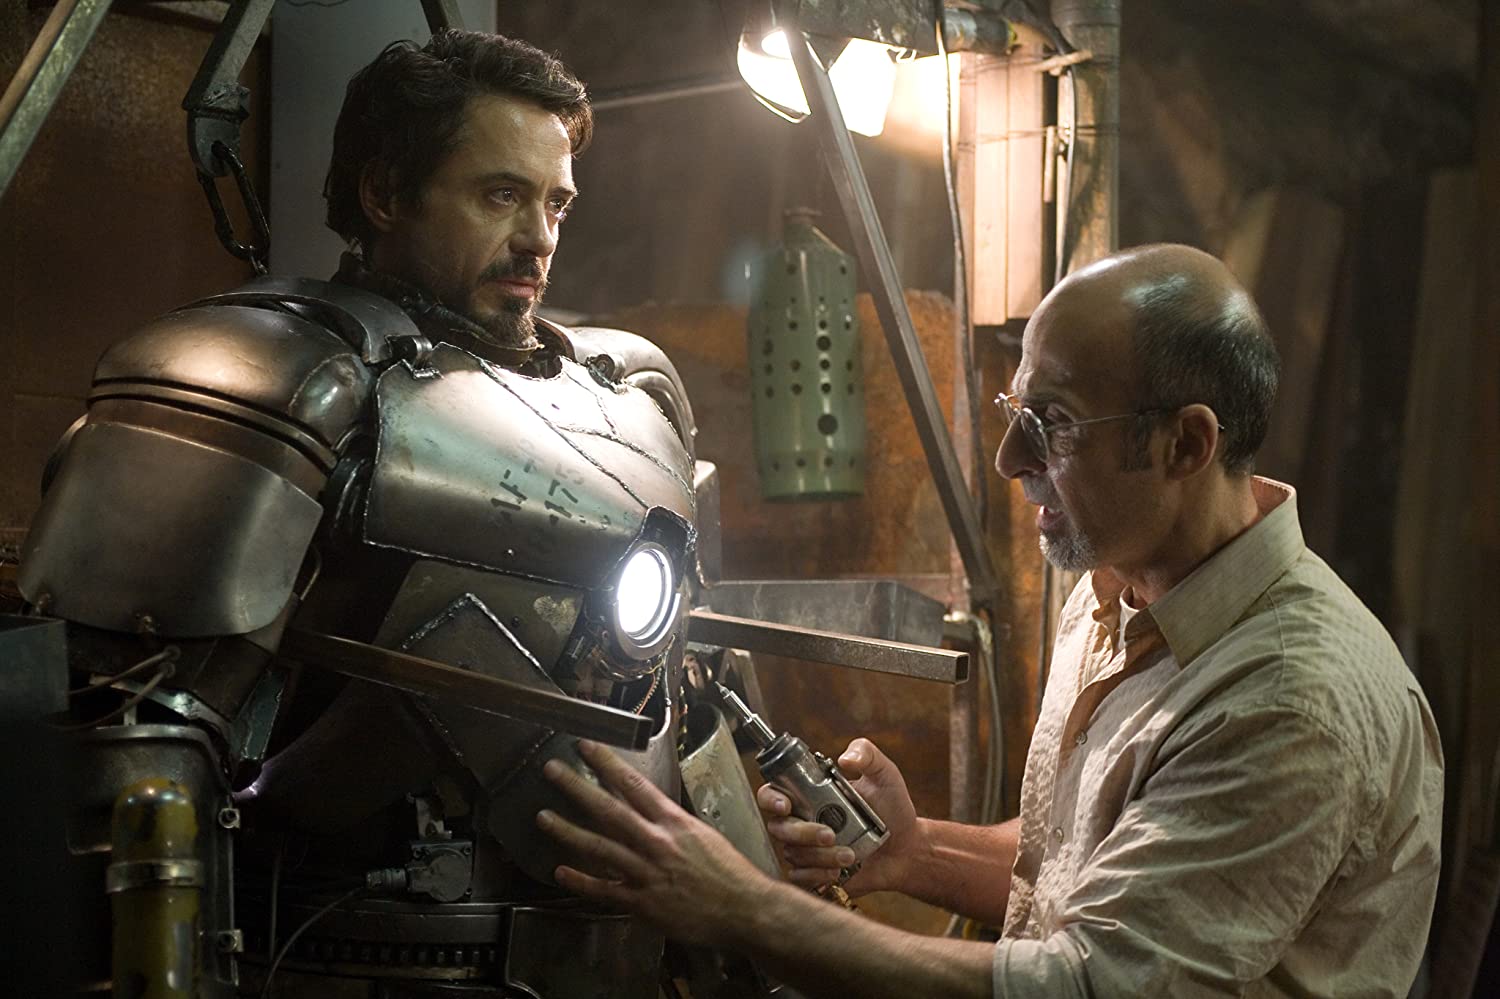 What is the name of the doctor that saves Tony’s life in Iron Man?